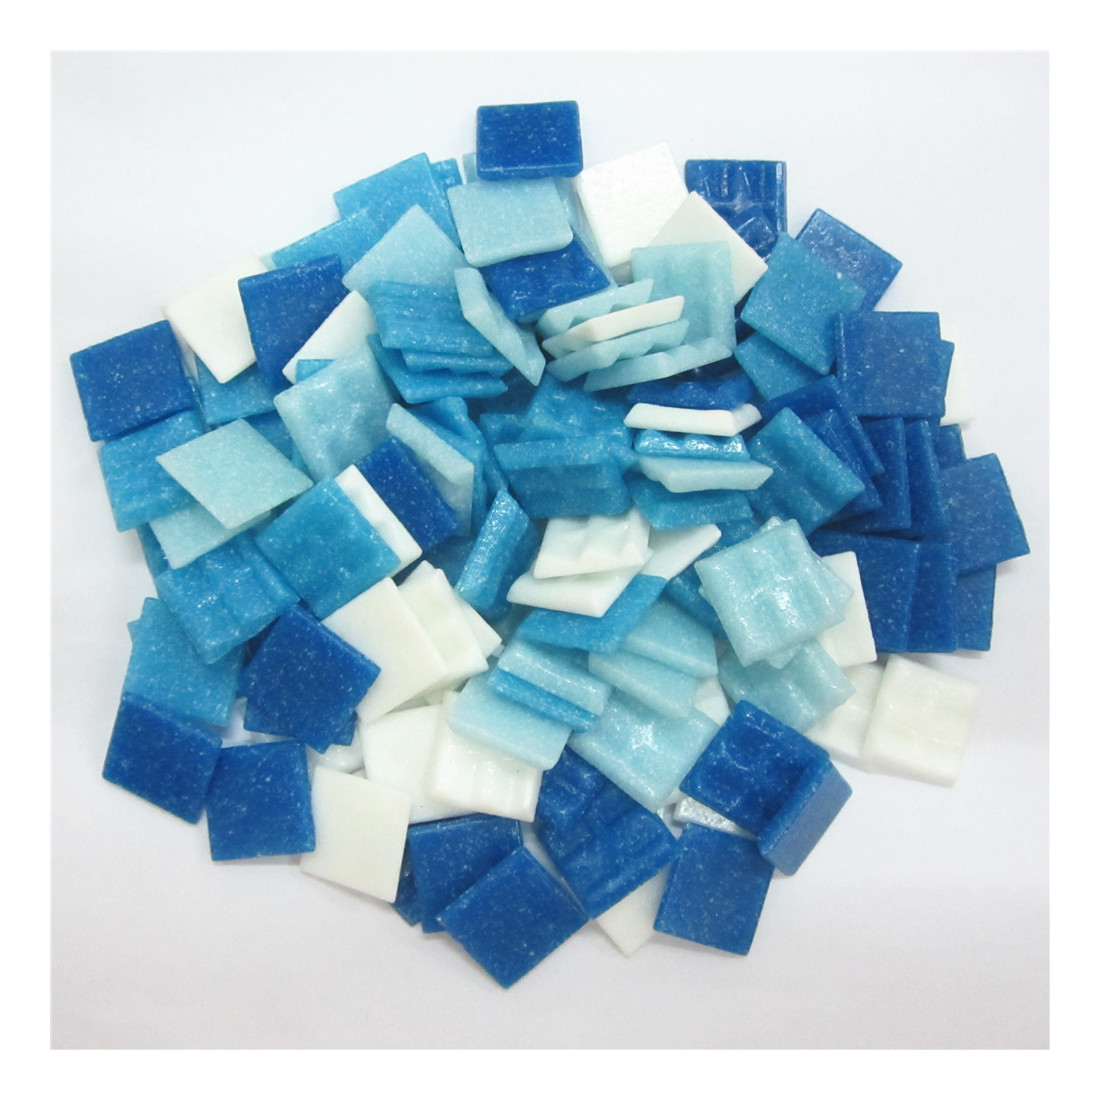 Hot Sale Design Square Shape Glass Craft Mosaic Tiles for Crafts Colorful